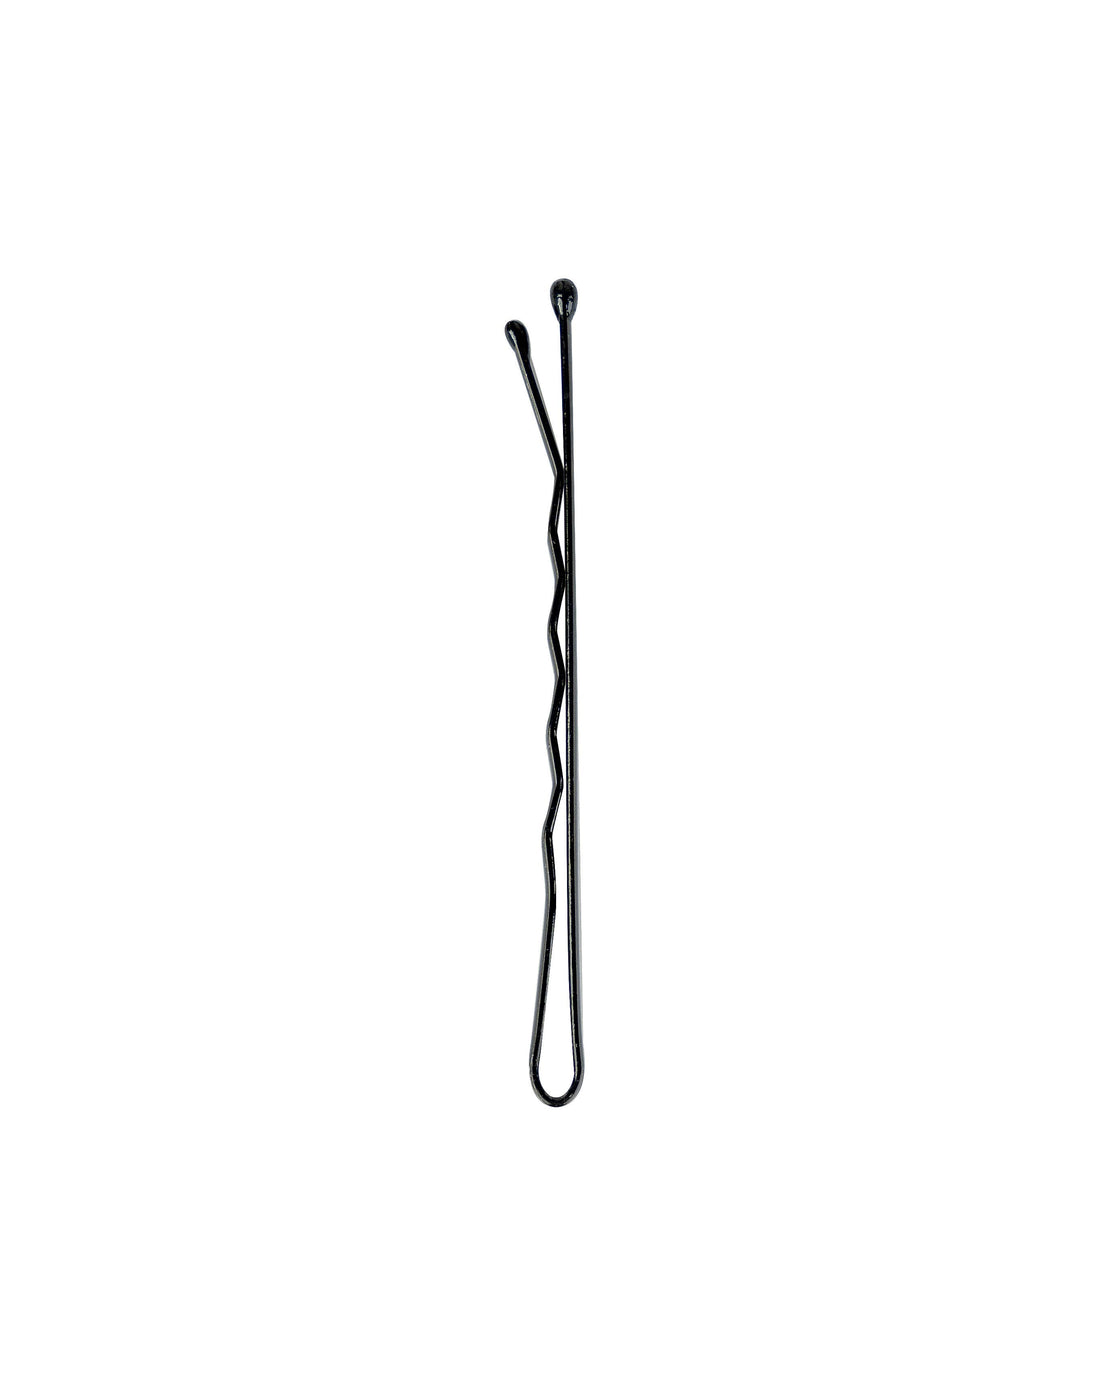 Brushworks Black Bobby Pins - 50 Pieces